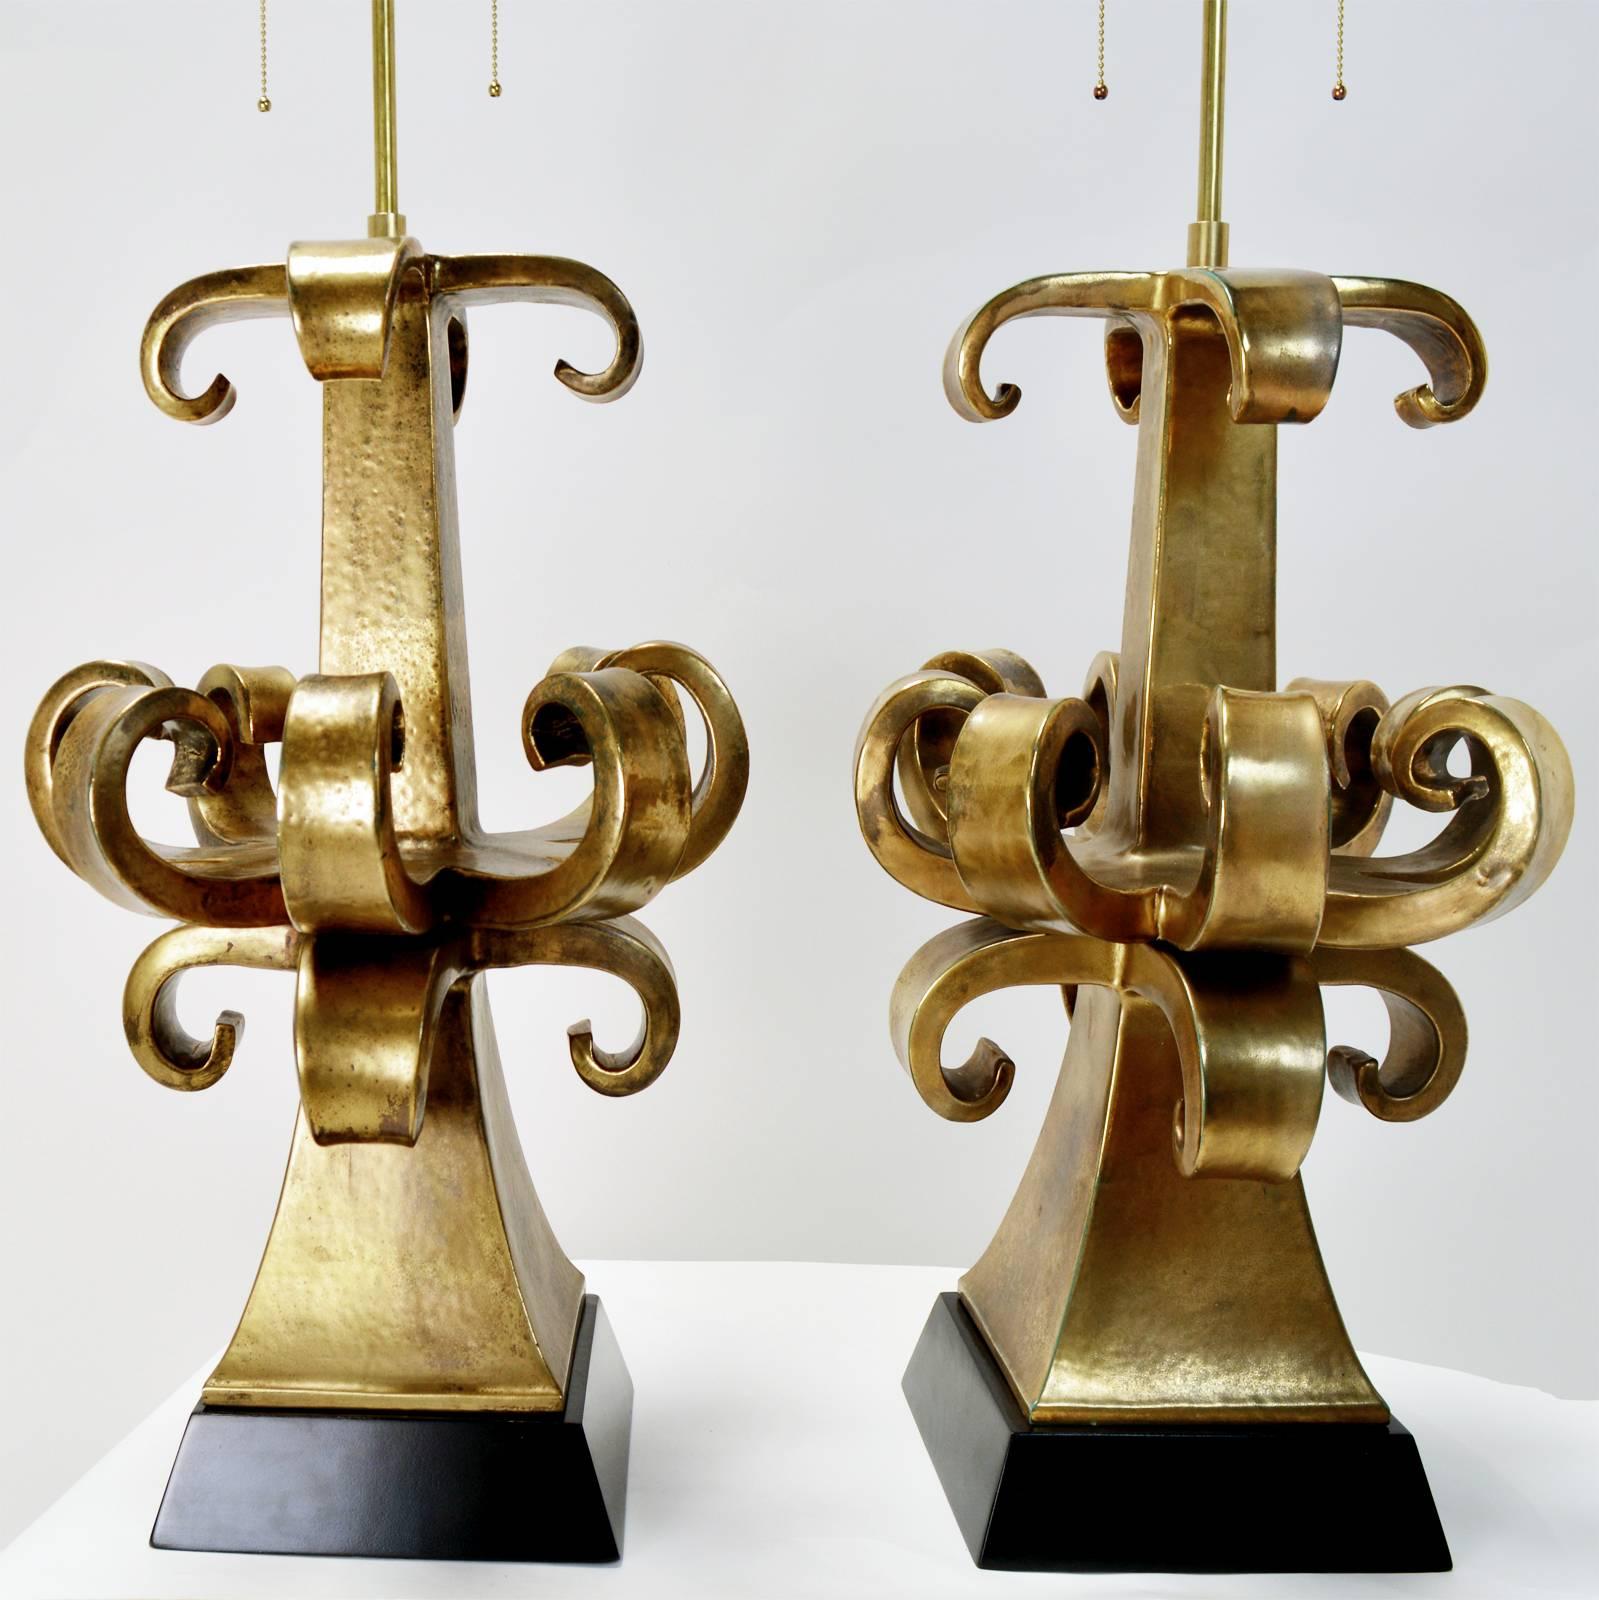 A monumental pair of sculptural lamps by Zanuso for Marbro Lamp Co. Gold glazed terracotta form on a black painted wood base. Rewired with new double socket cluster. Appears to have earlier repairs.